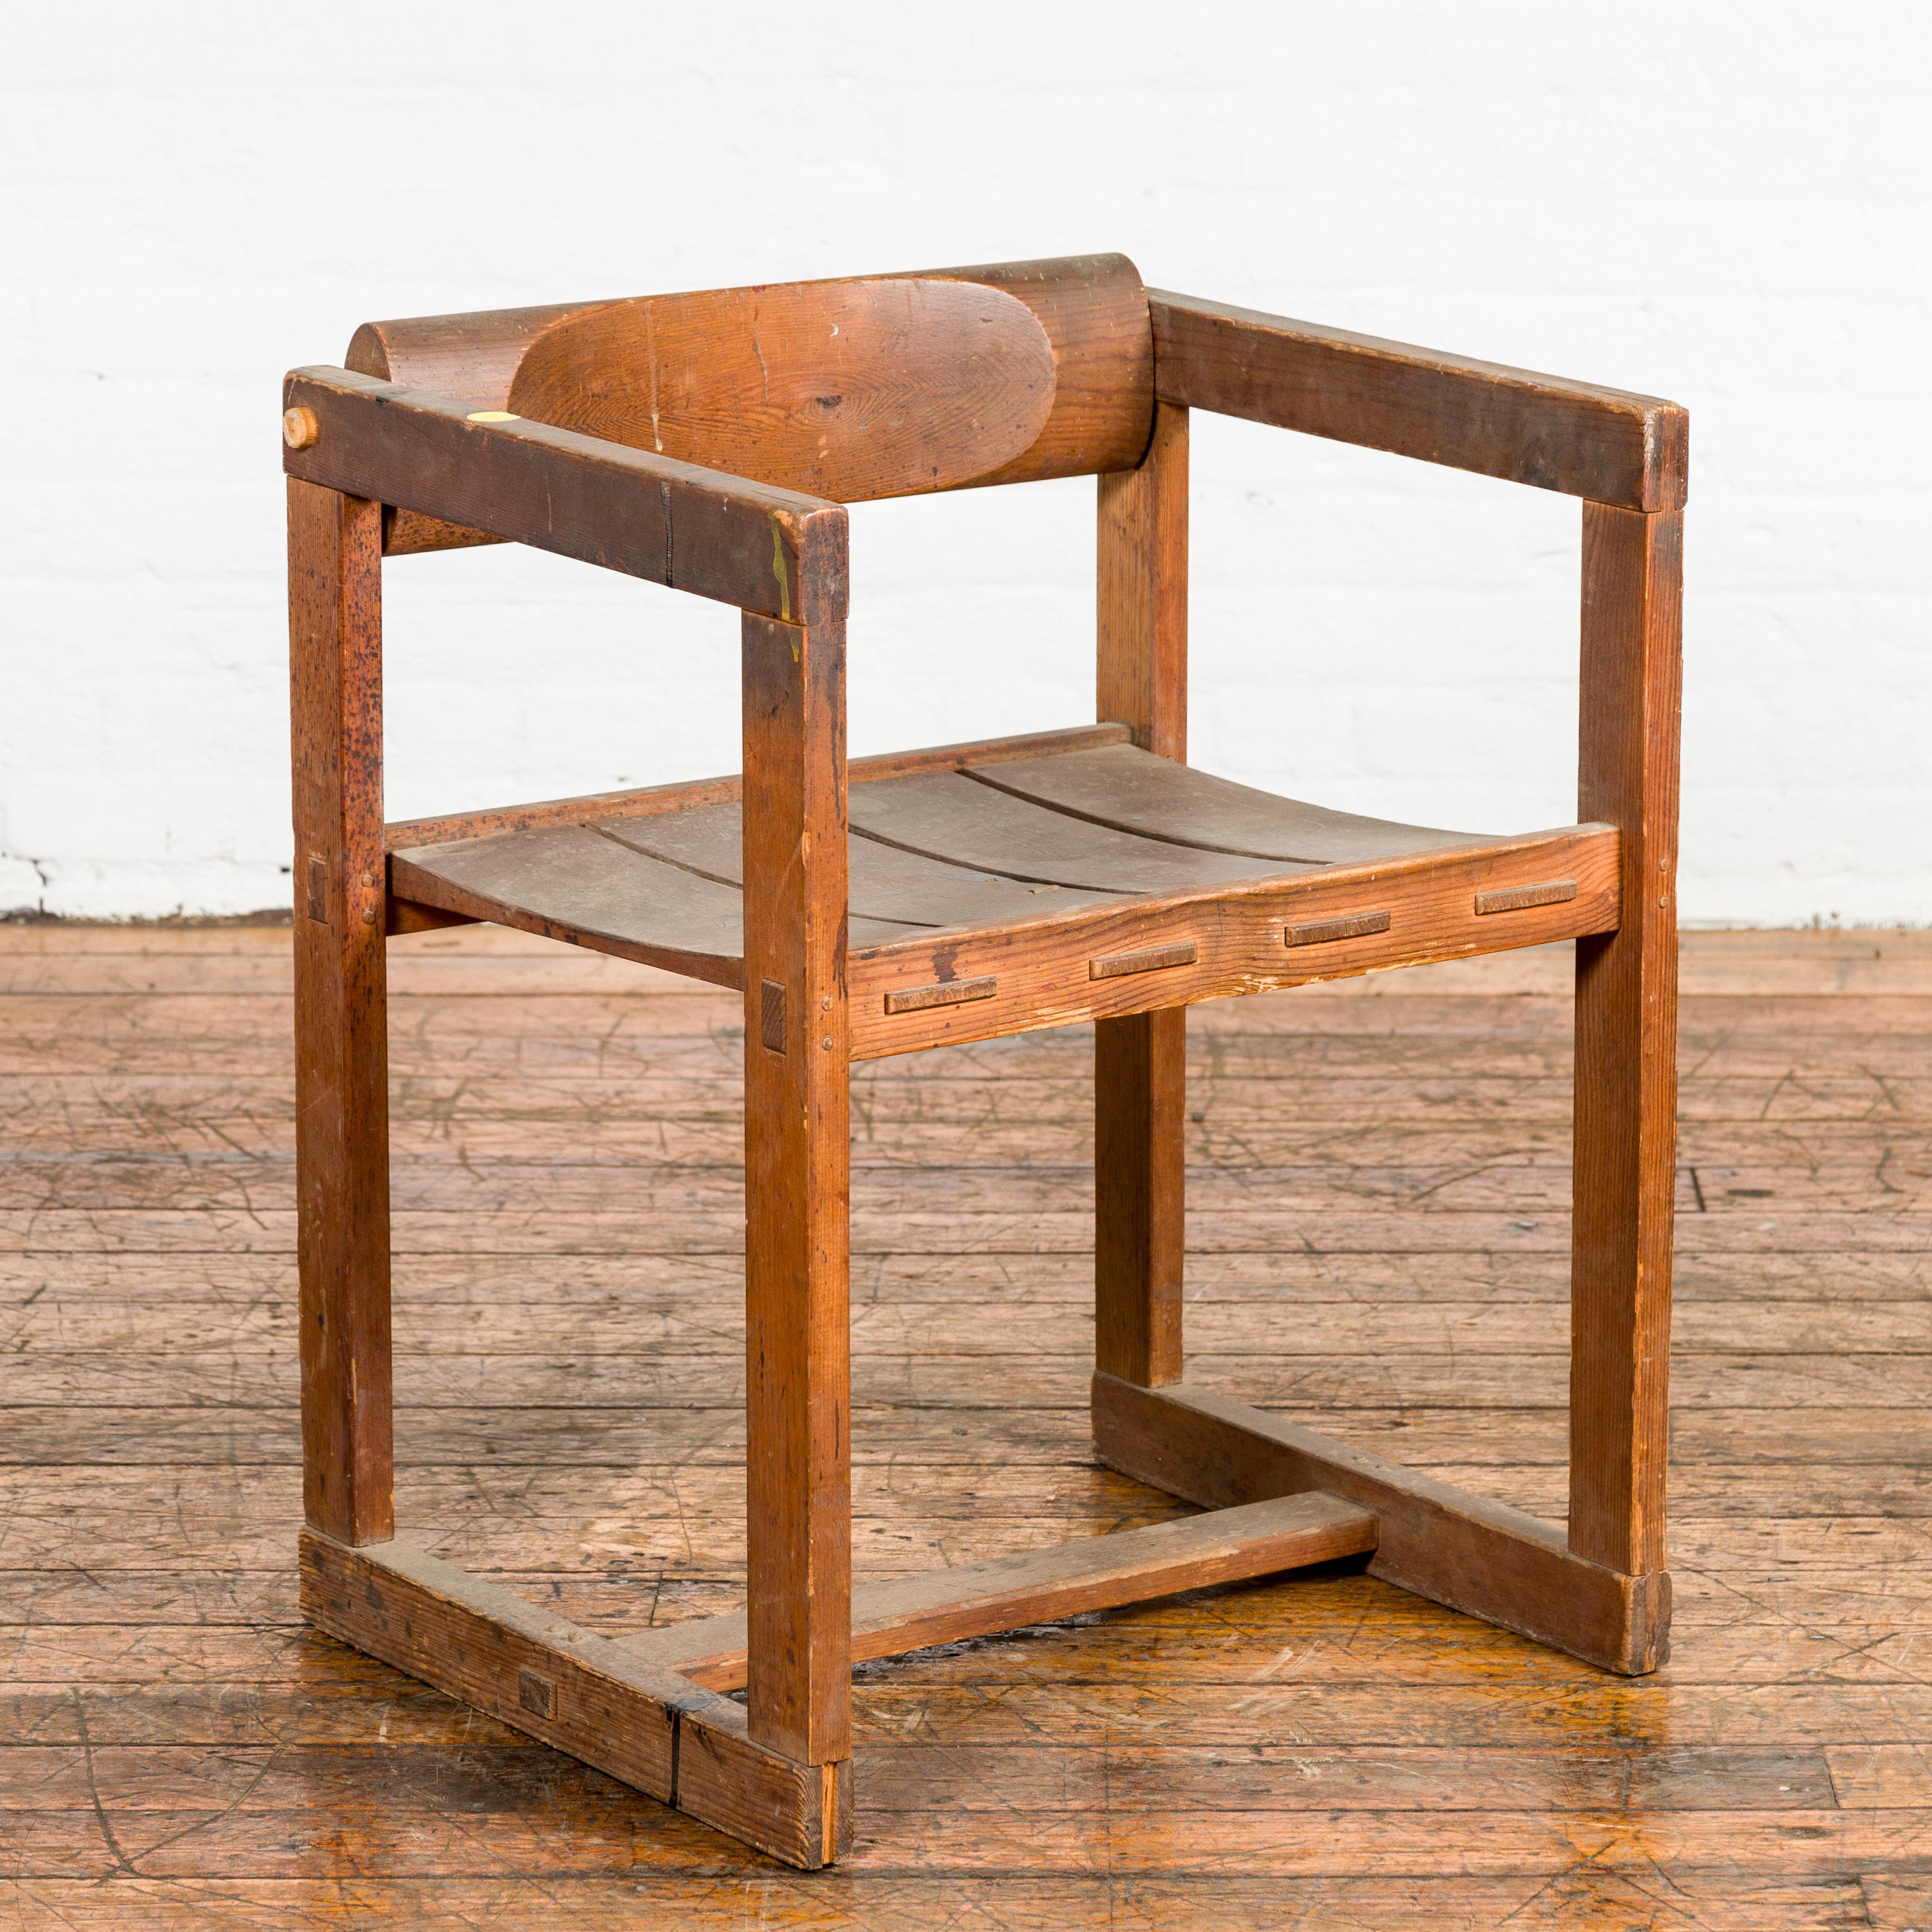 An Industrial style vintage artist desk chair with rustic character. Meet the epitome of rugged functionality: this Industrial-style vintage artist desk chair. Featuring a slatted seat that subtly curves inward, the chair beckons you to take a seat.